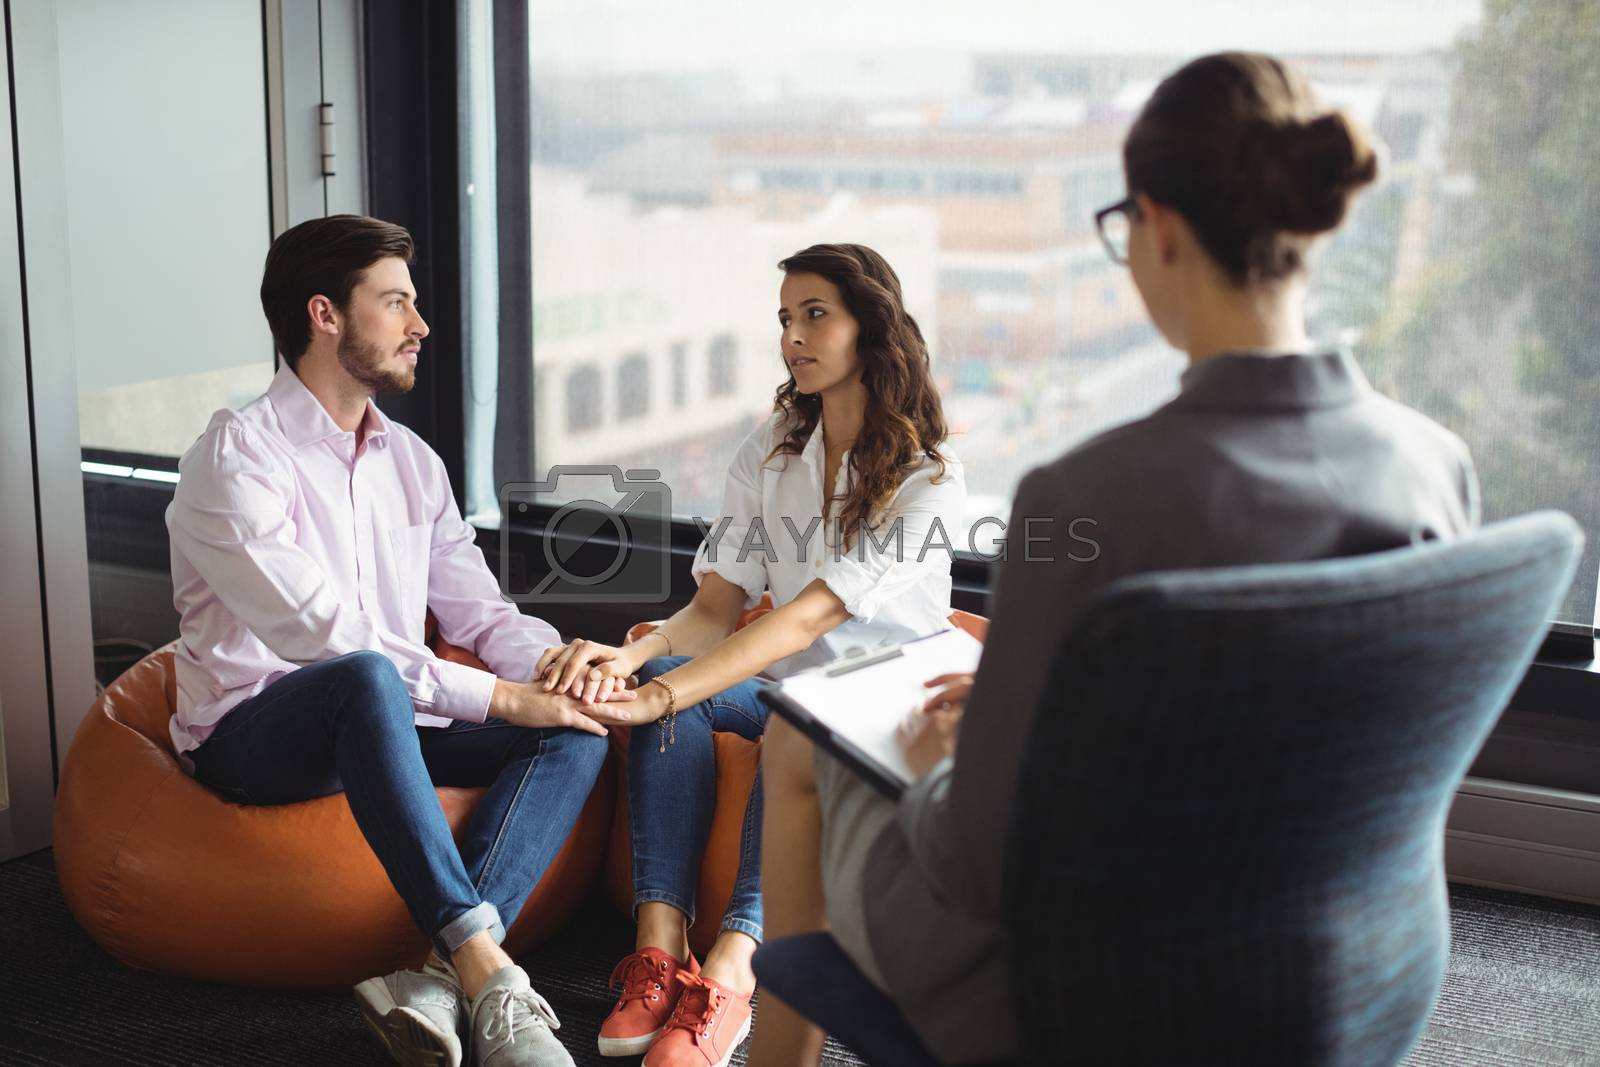 Royalty free image of Couple talking to a marriage counselor by Wavebreakmedia